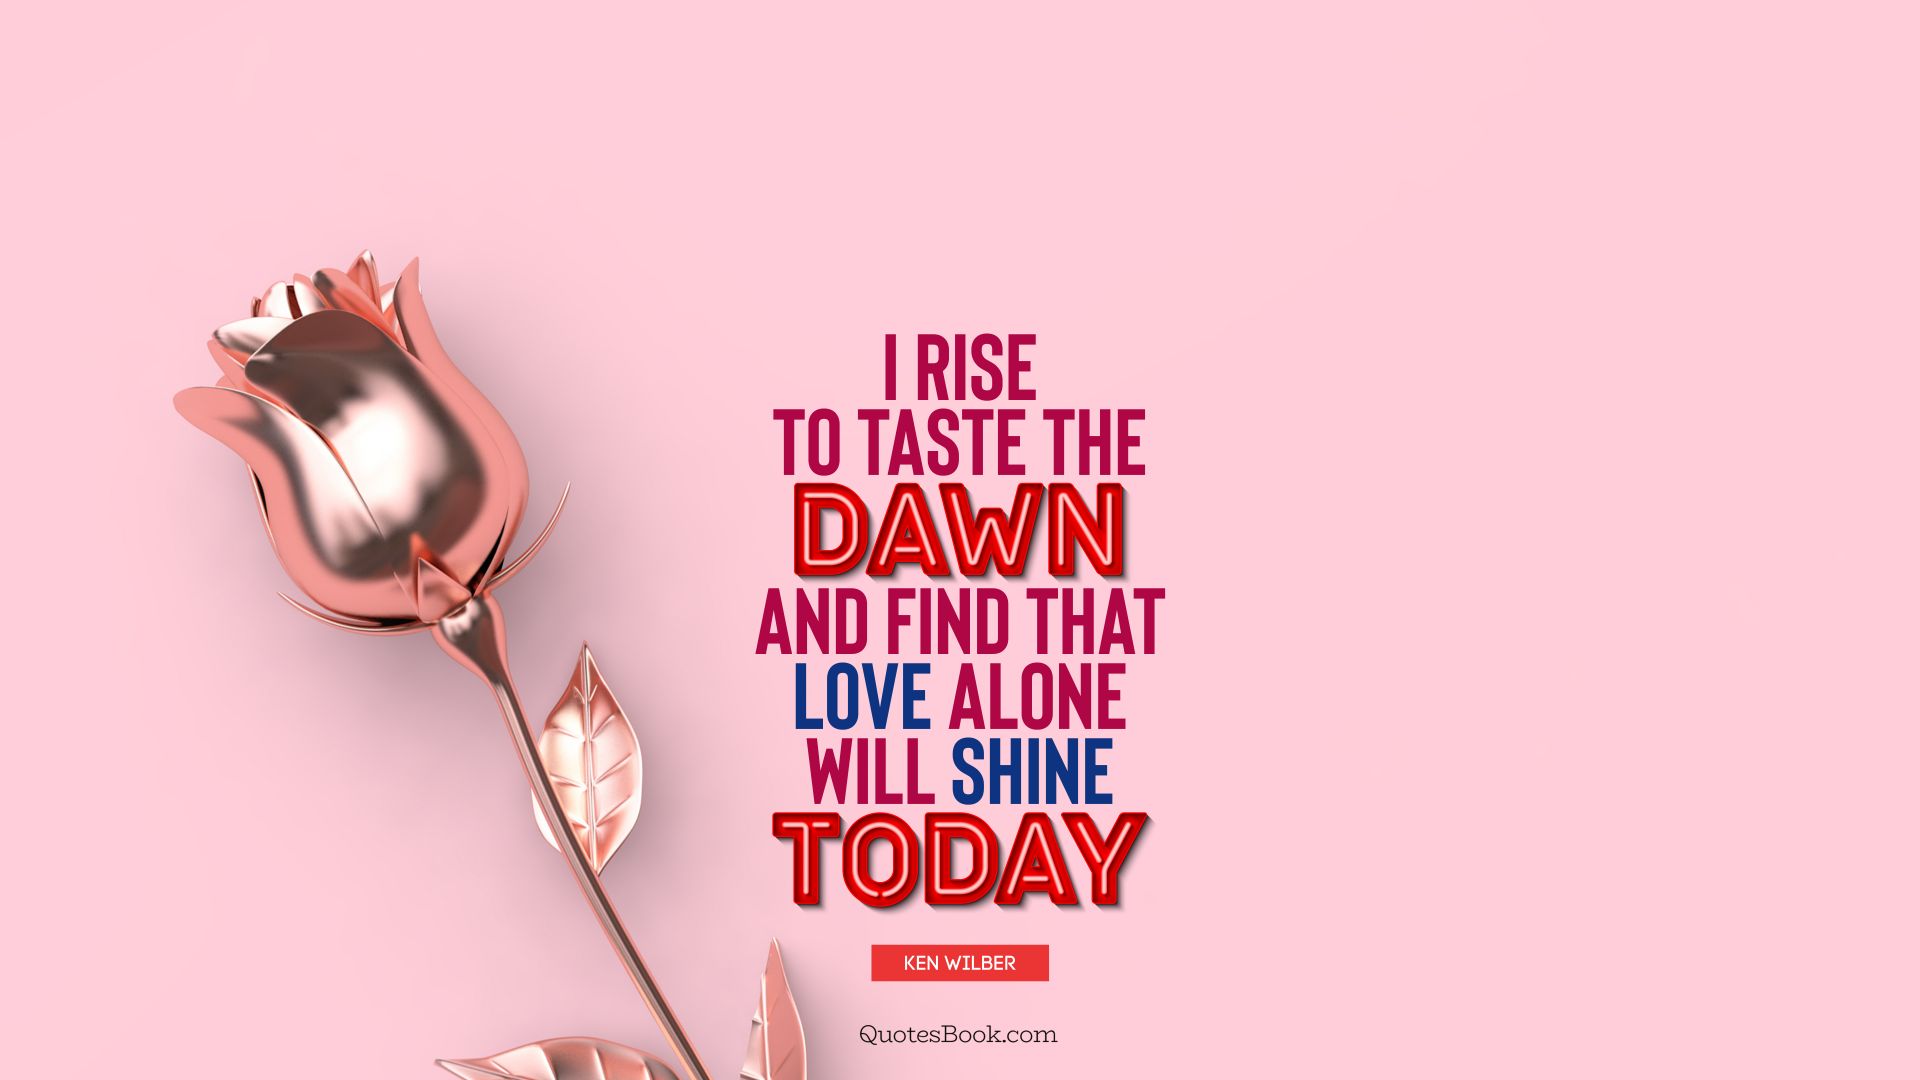 I rise to taste the dawn, and find that love alone will shine today. - Quote by Ken Wilber